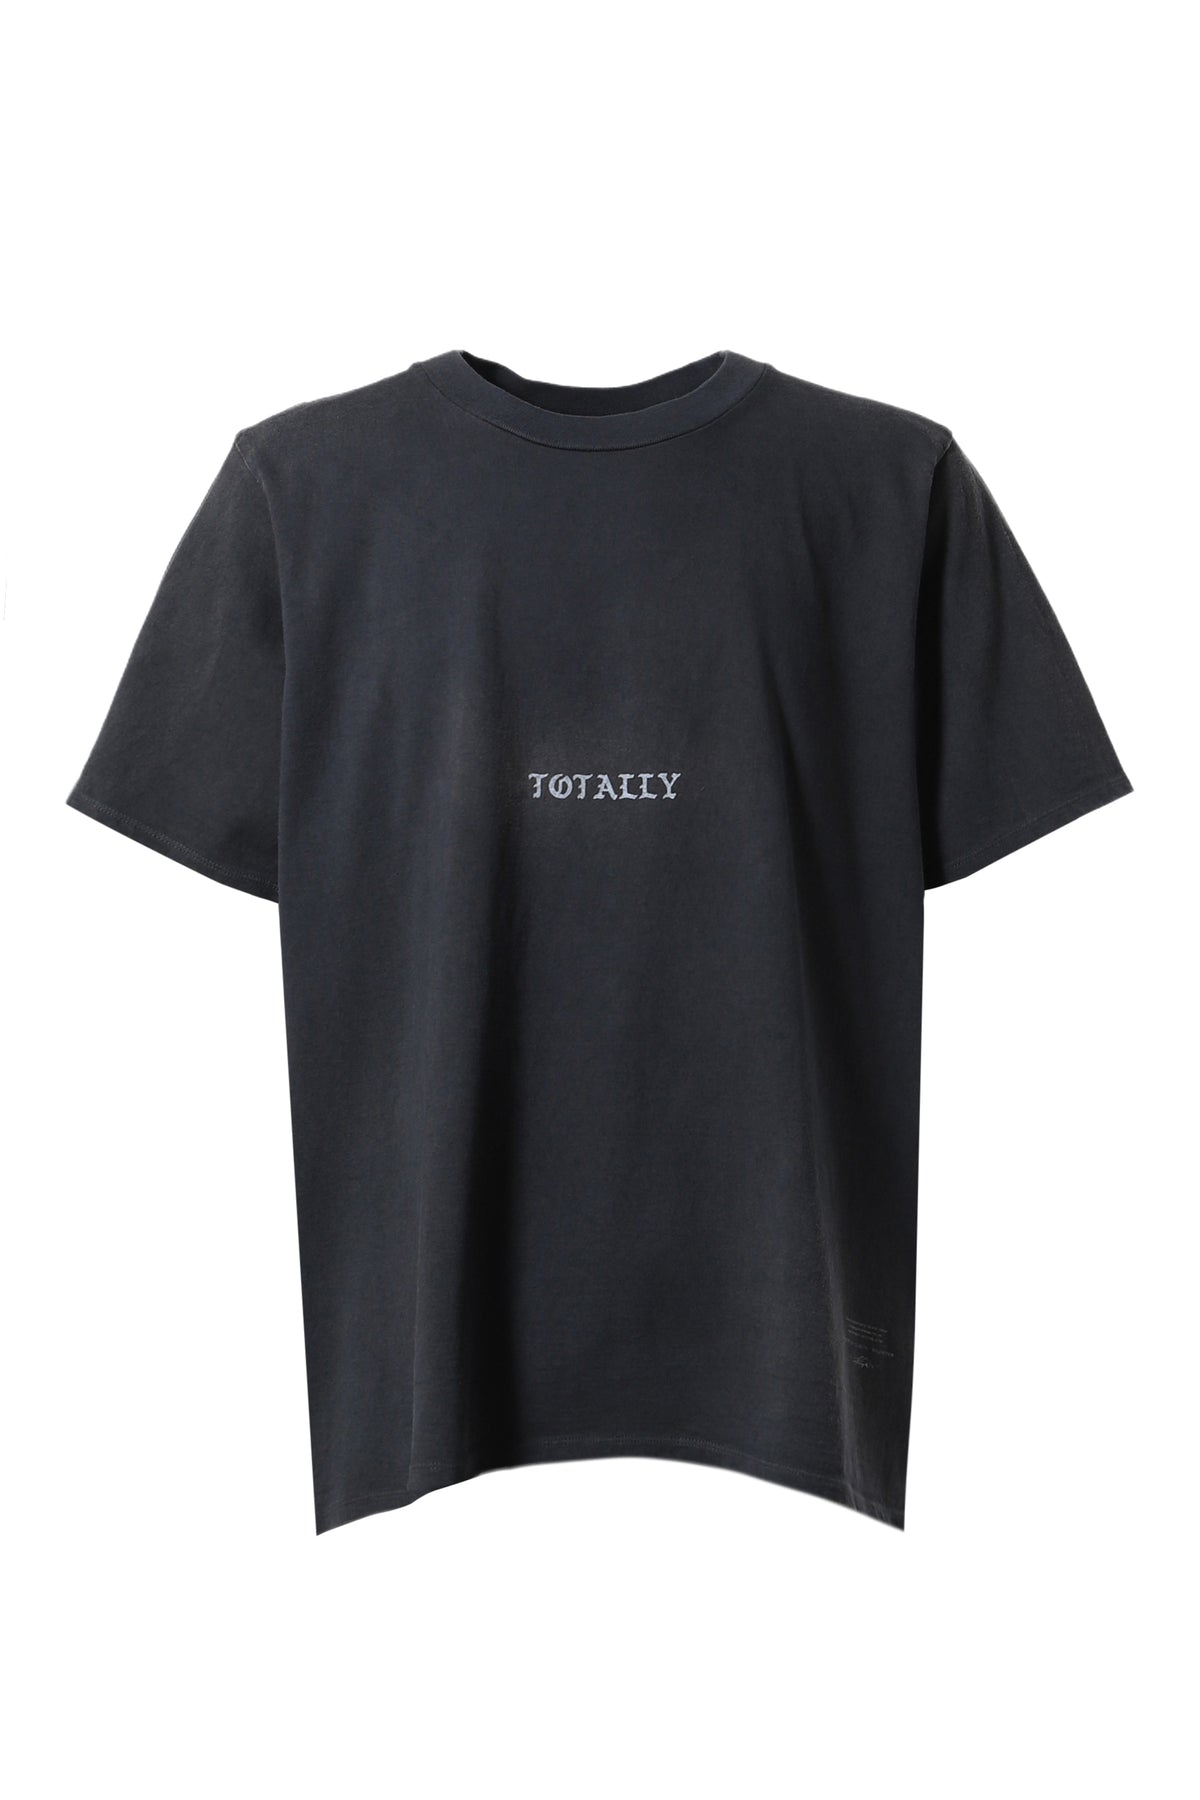 TOTALLY T-SHIRTS / BLK